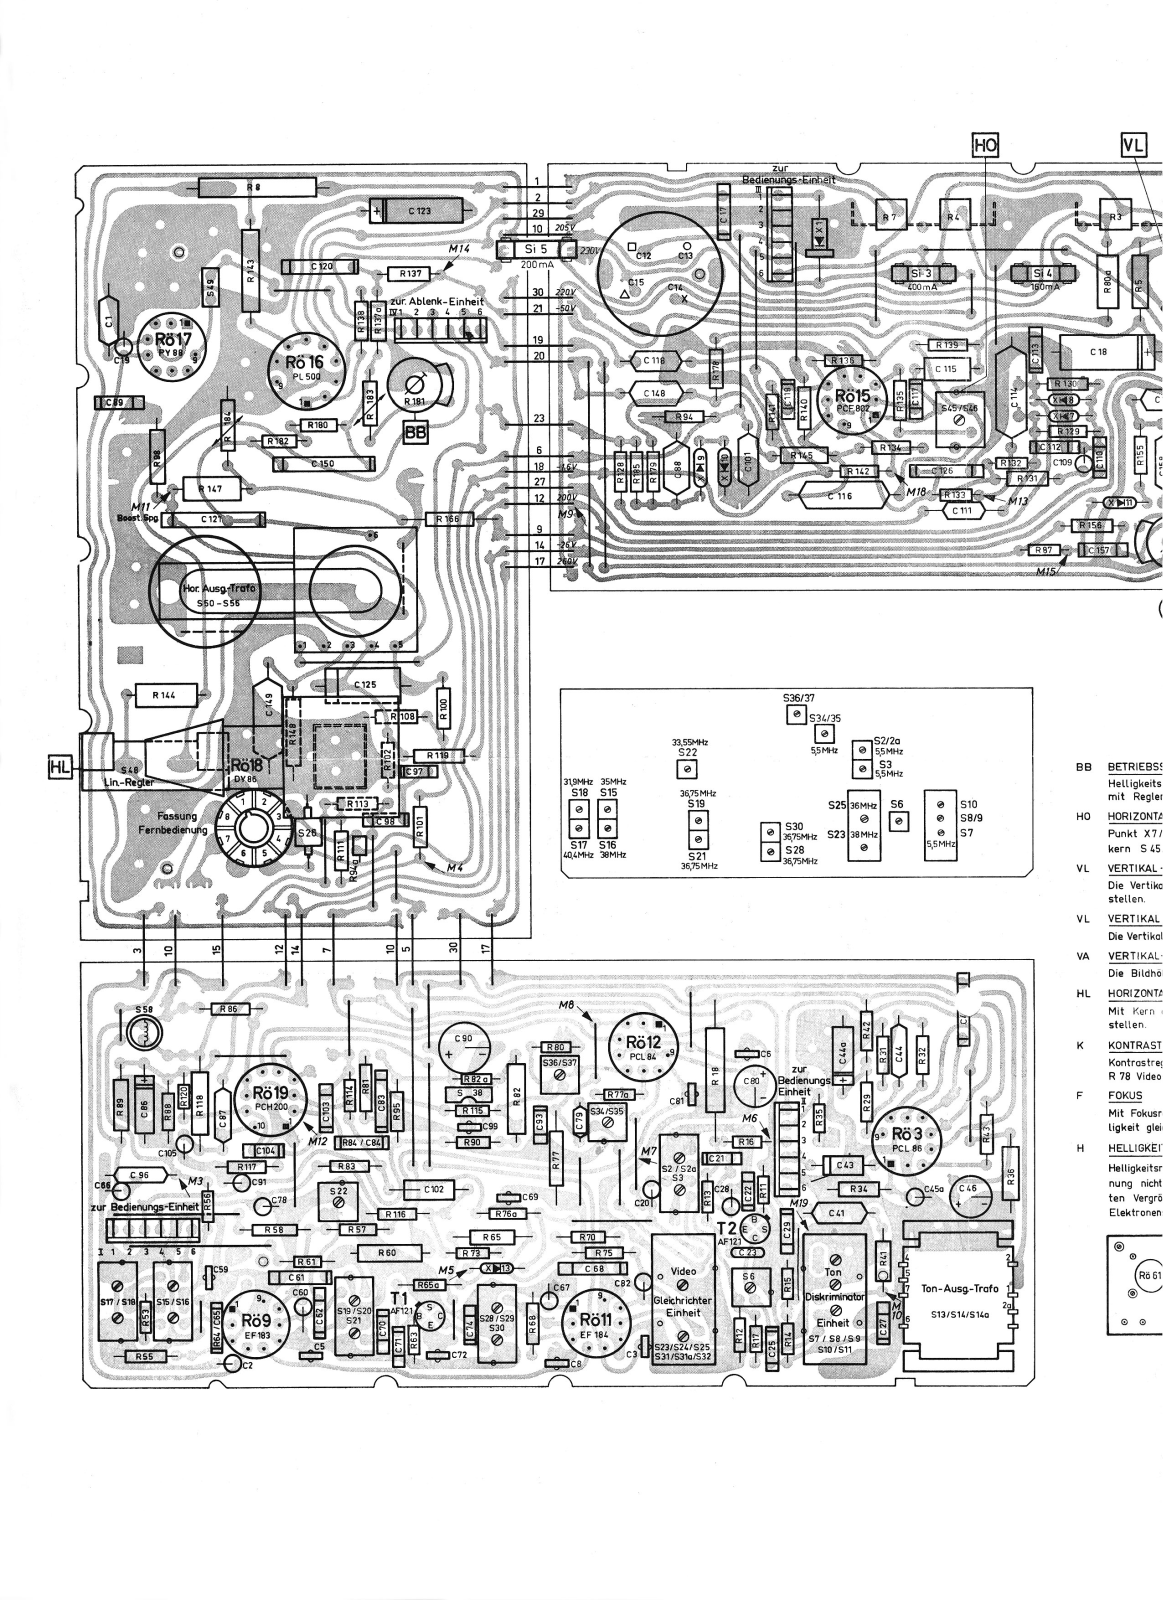 Philips 23cd511a Schematic